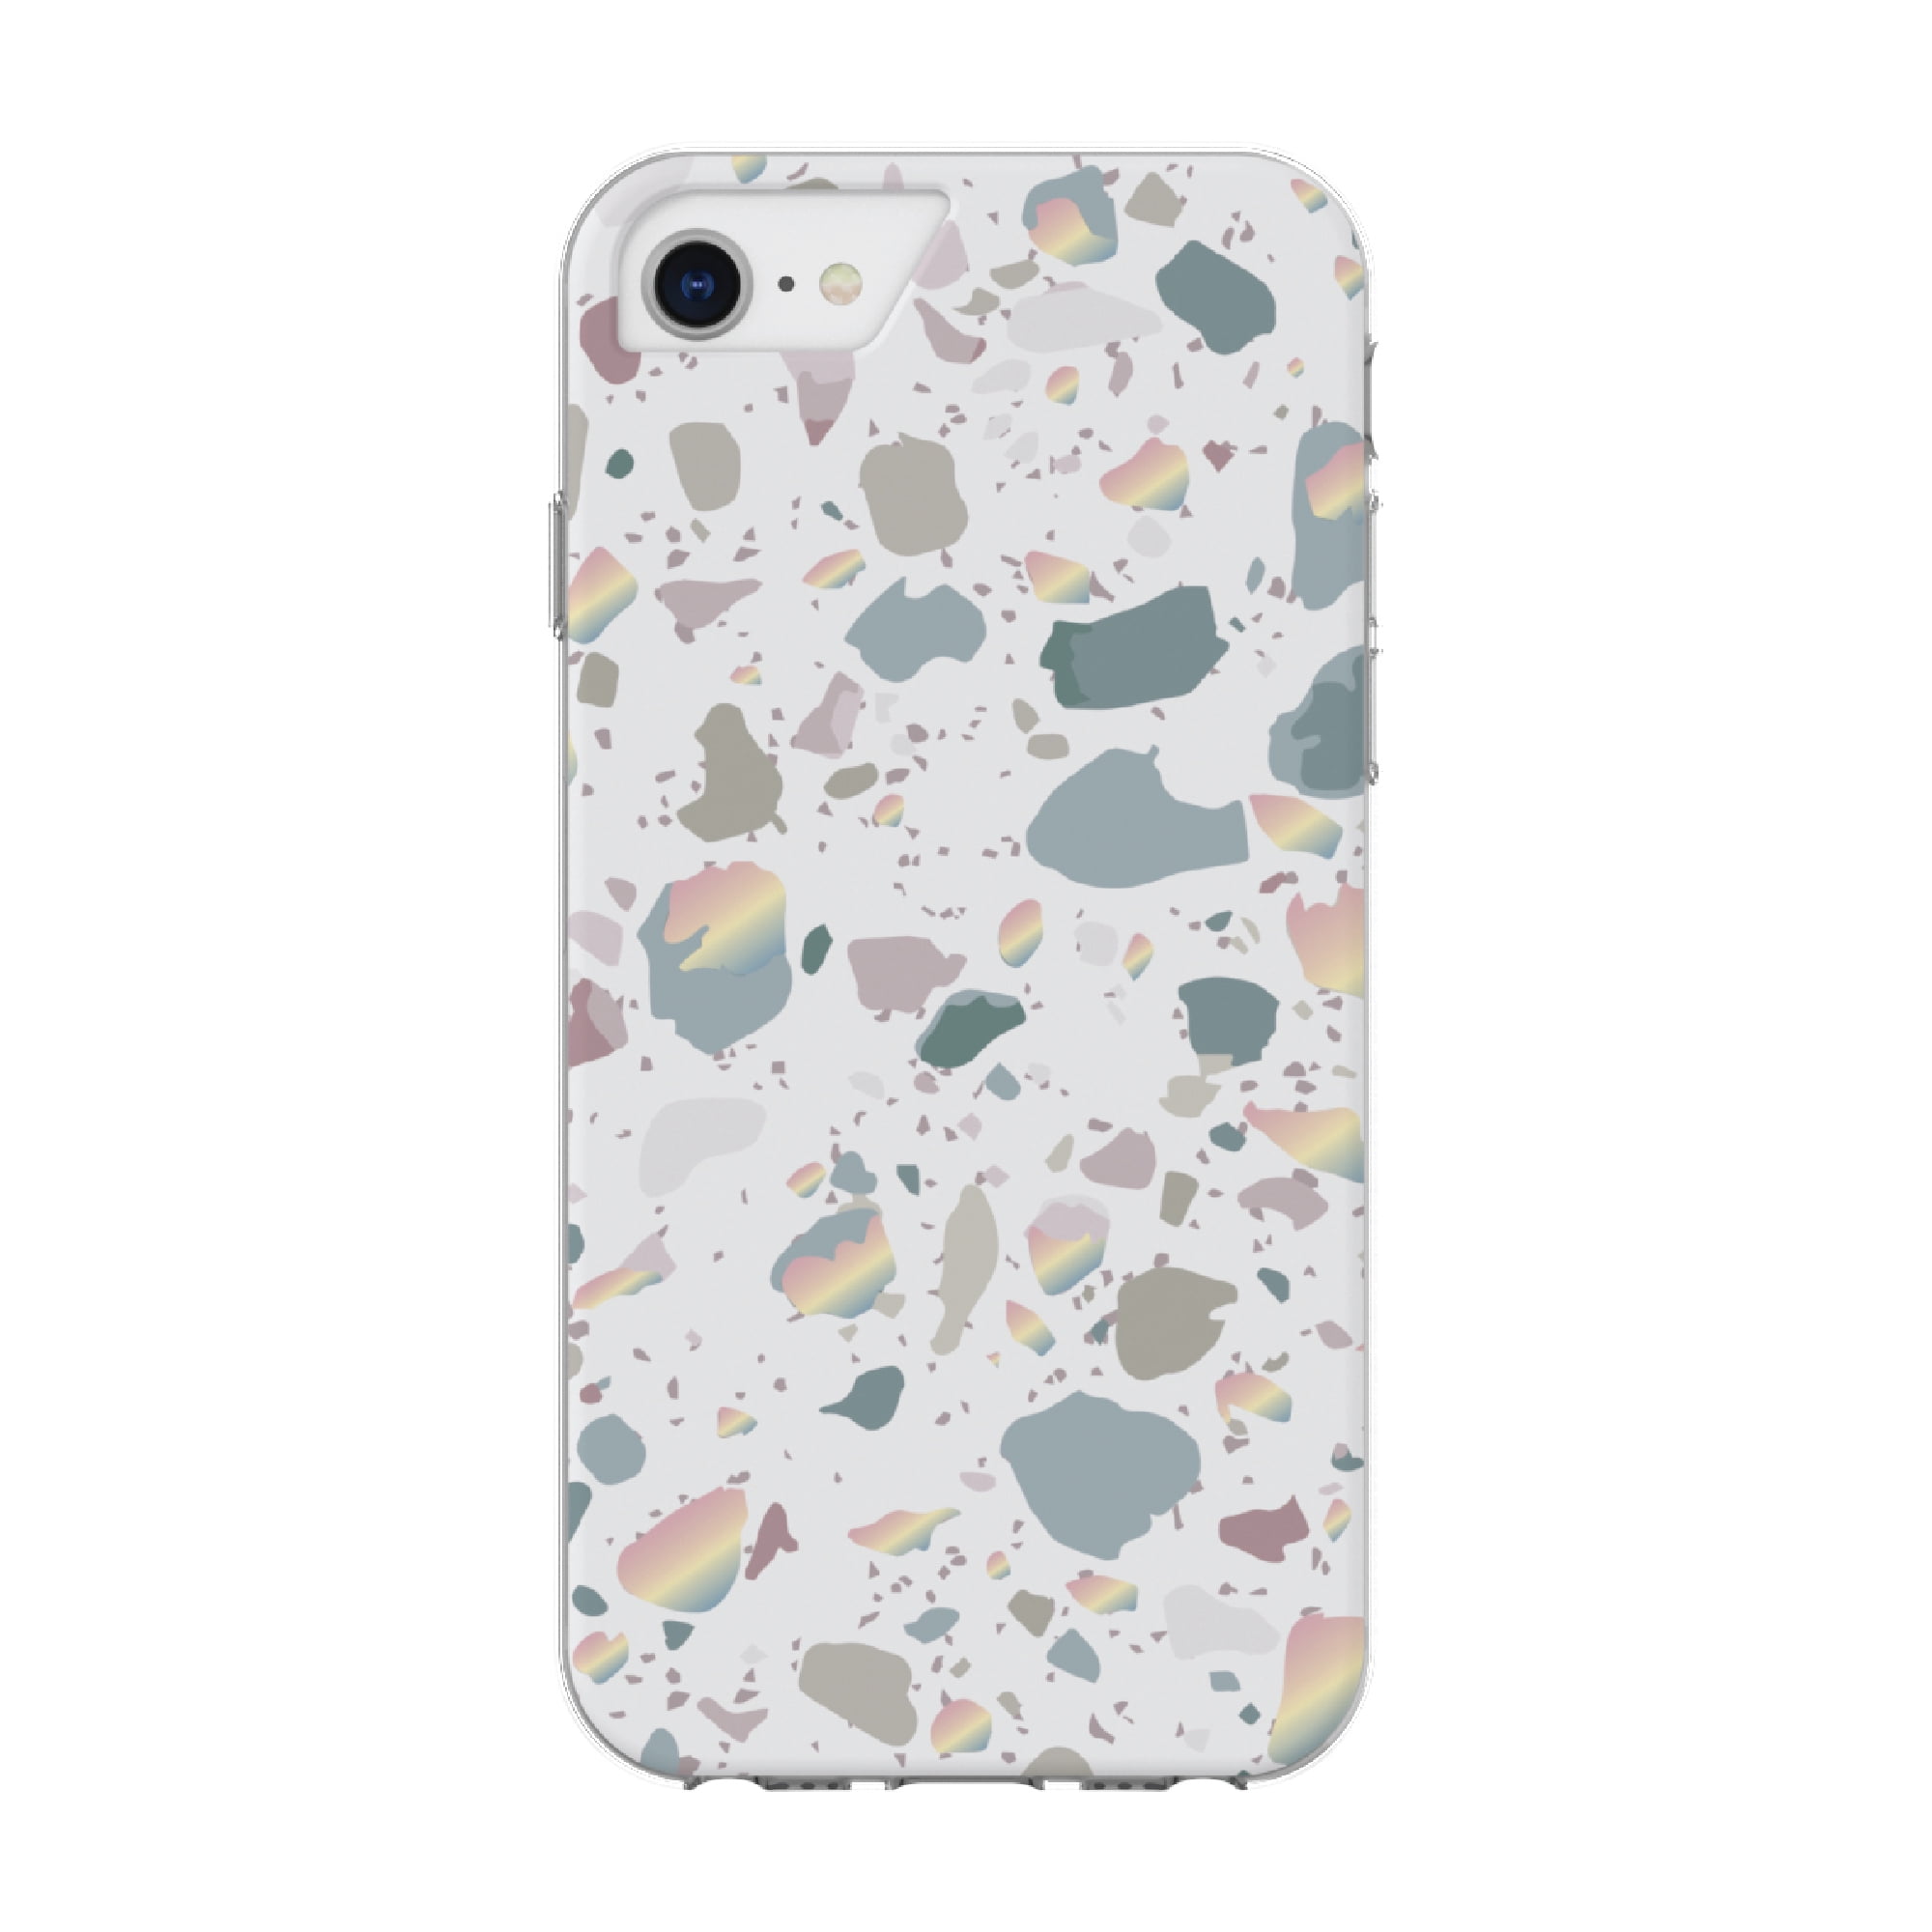 onn. Phone Case for iPhone SE 2022, iPhone SE 2020, iPhone 8, iPhone 7, iPhone 6s, iPhone 6 - White Terrazzo